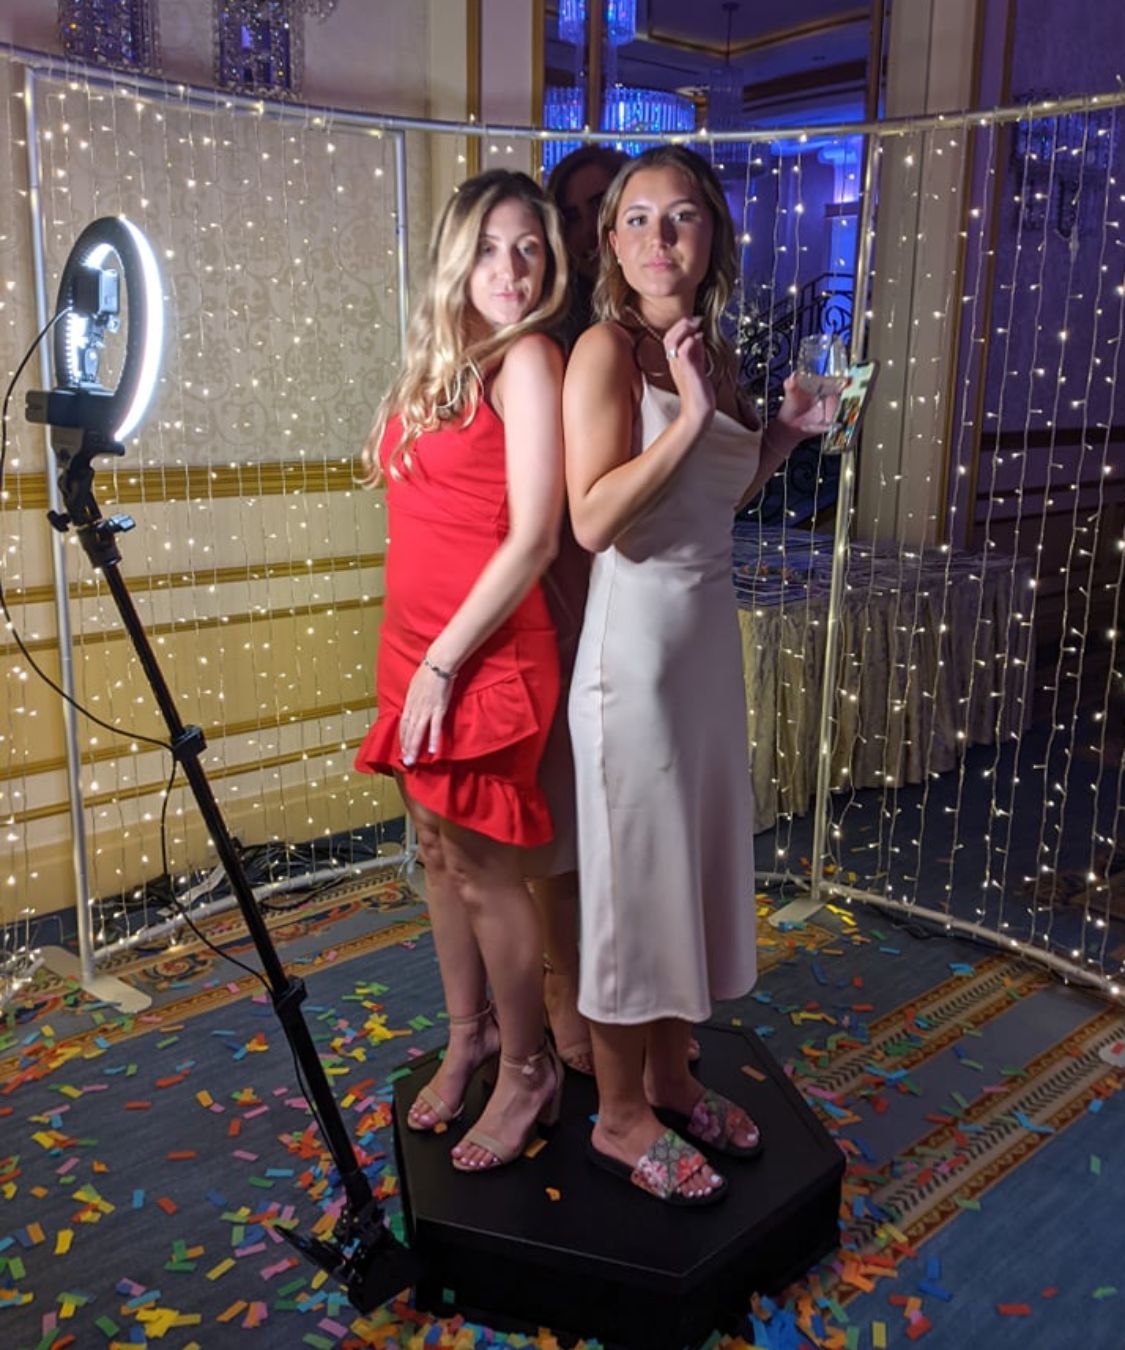 360 Photo Booth Rental